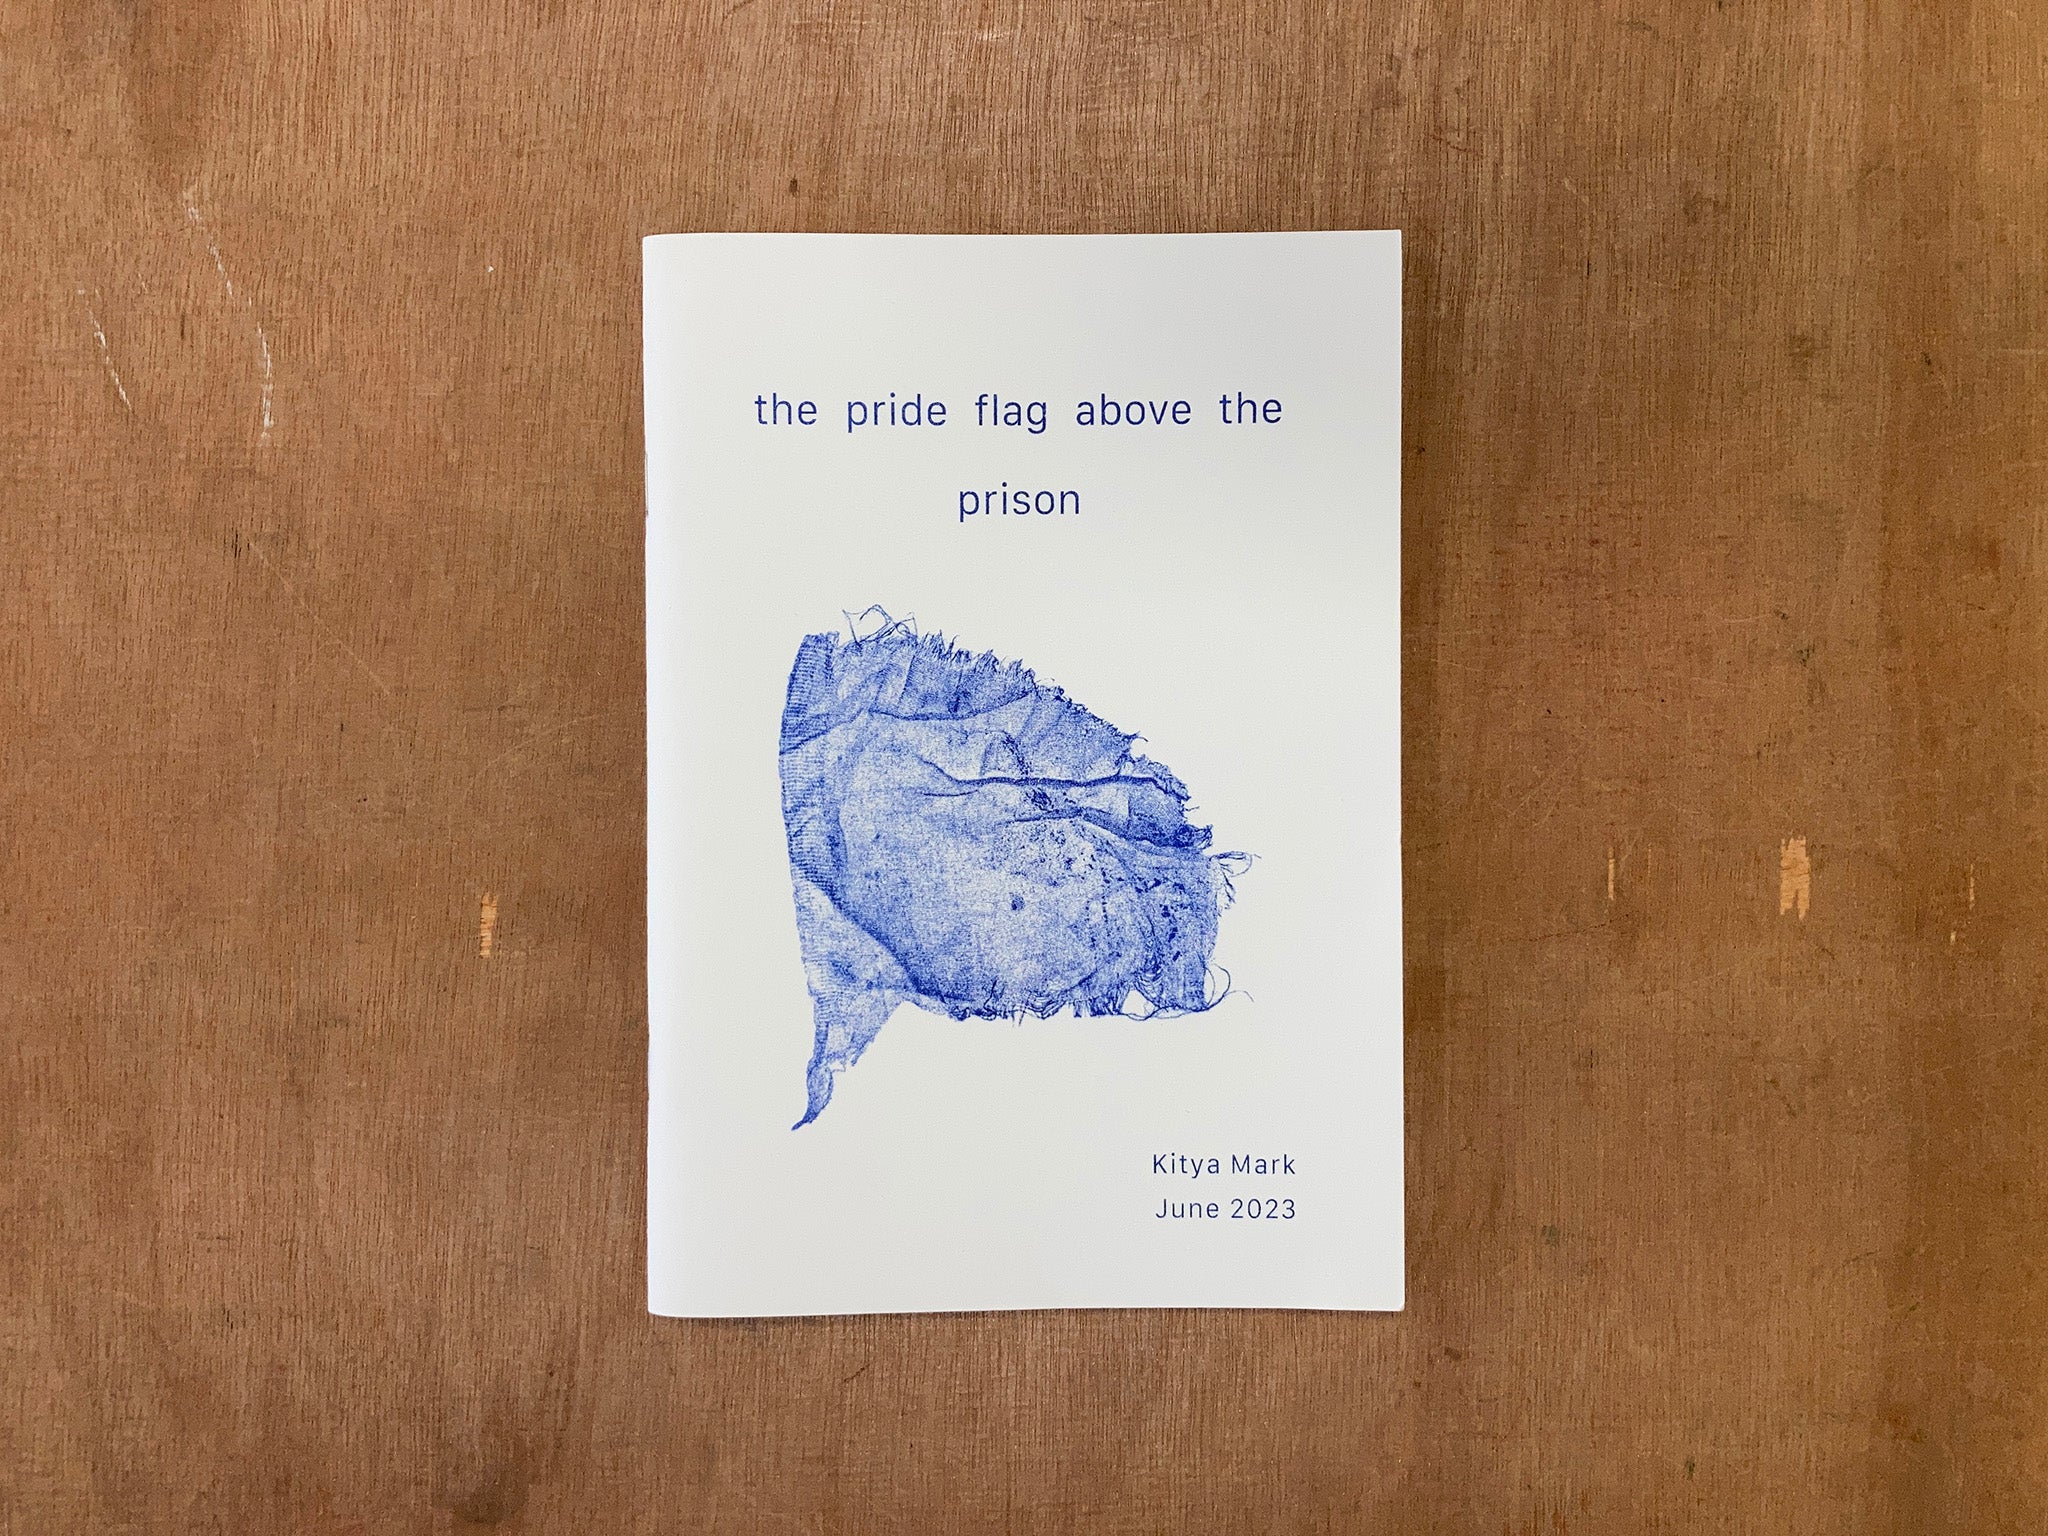 THE PRIDE FLAG ABOVE THE PRISON by Kitya Mark